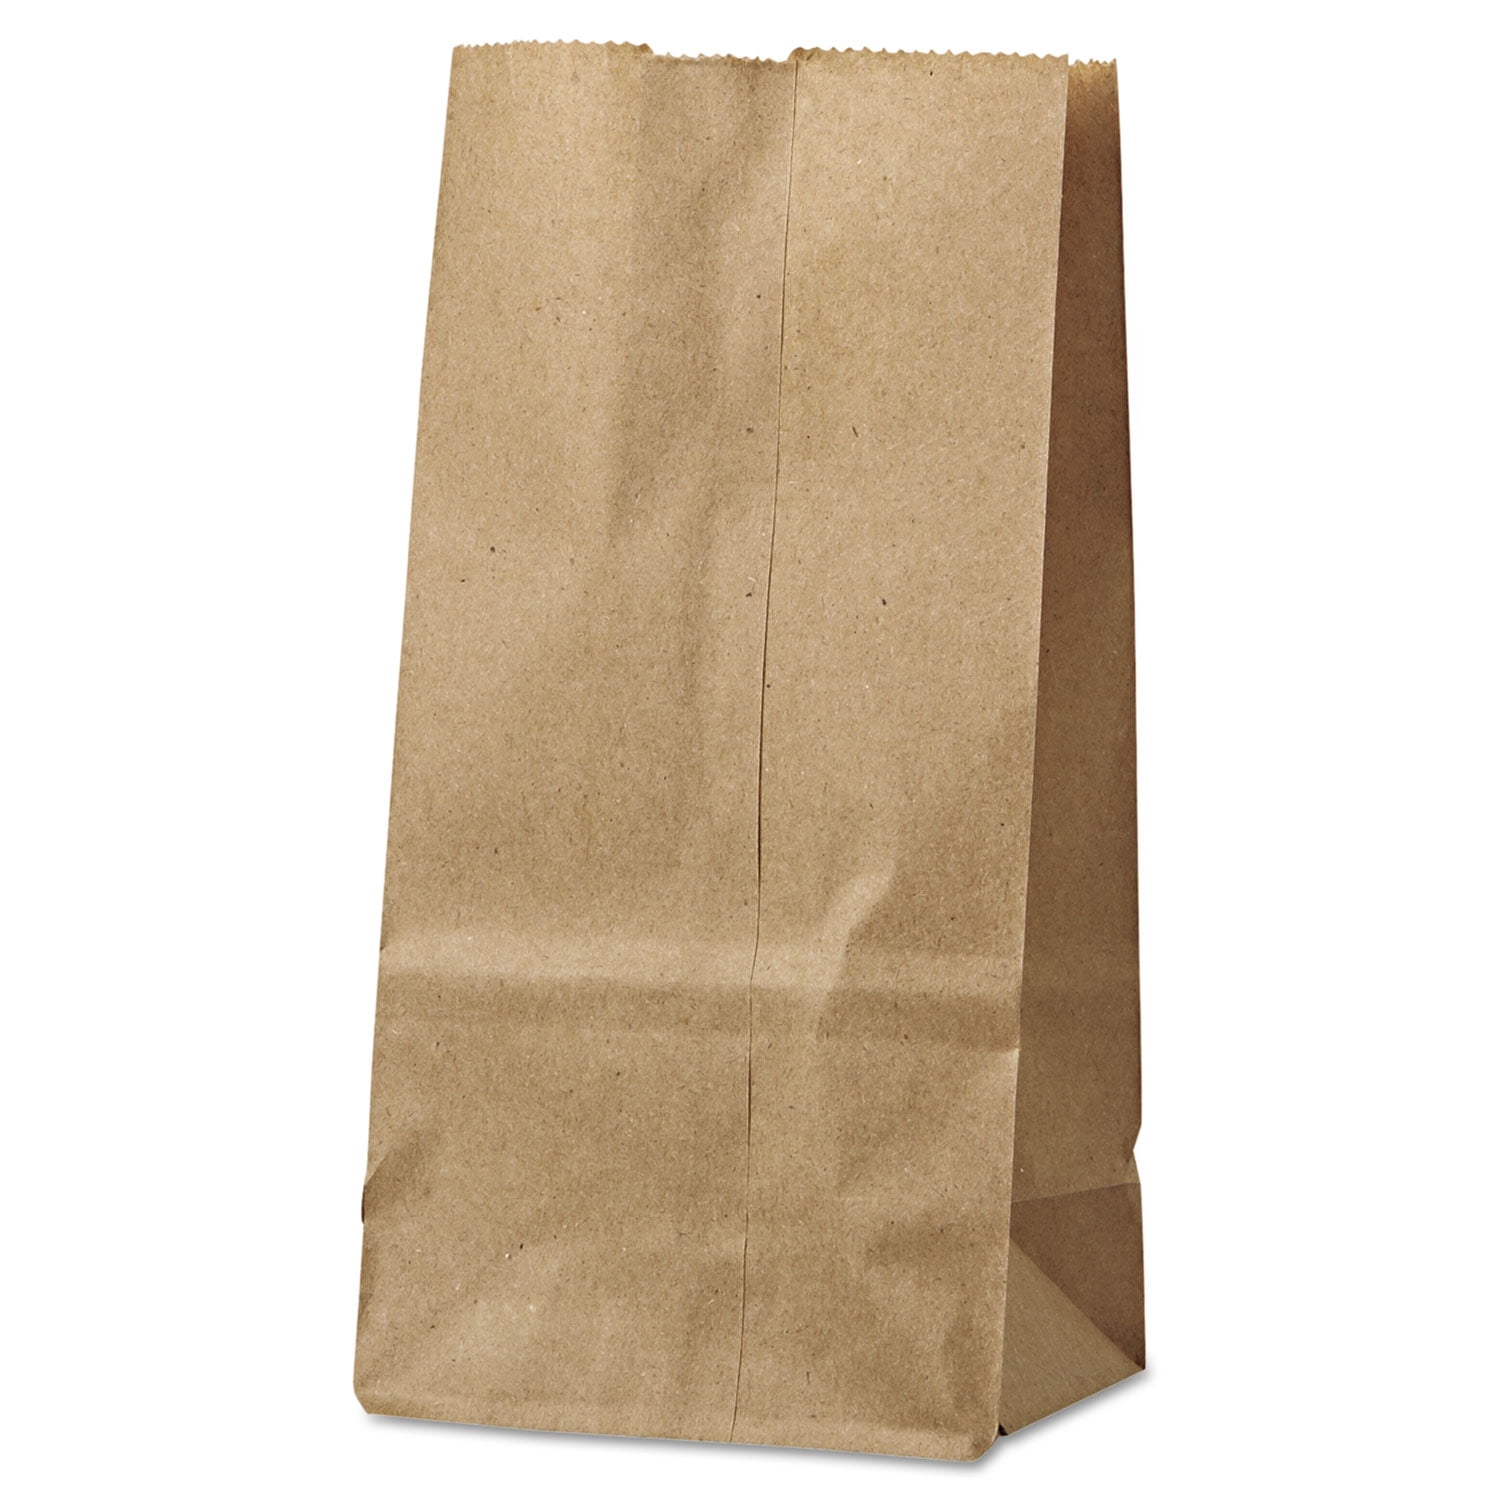 Duro 18402 CPC 2 lbs Brown Grocery Bags - Case of 500